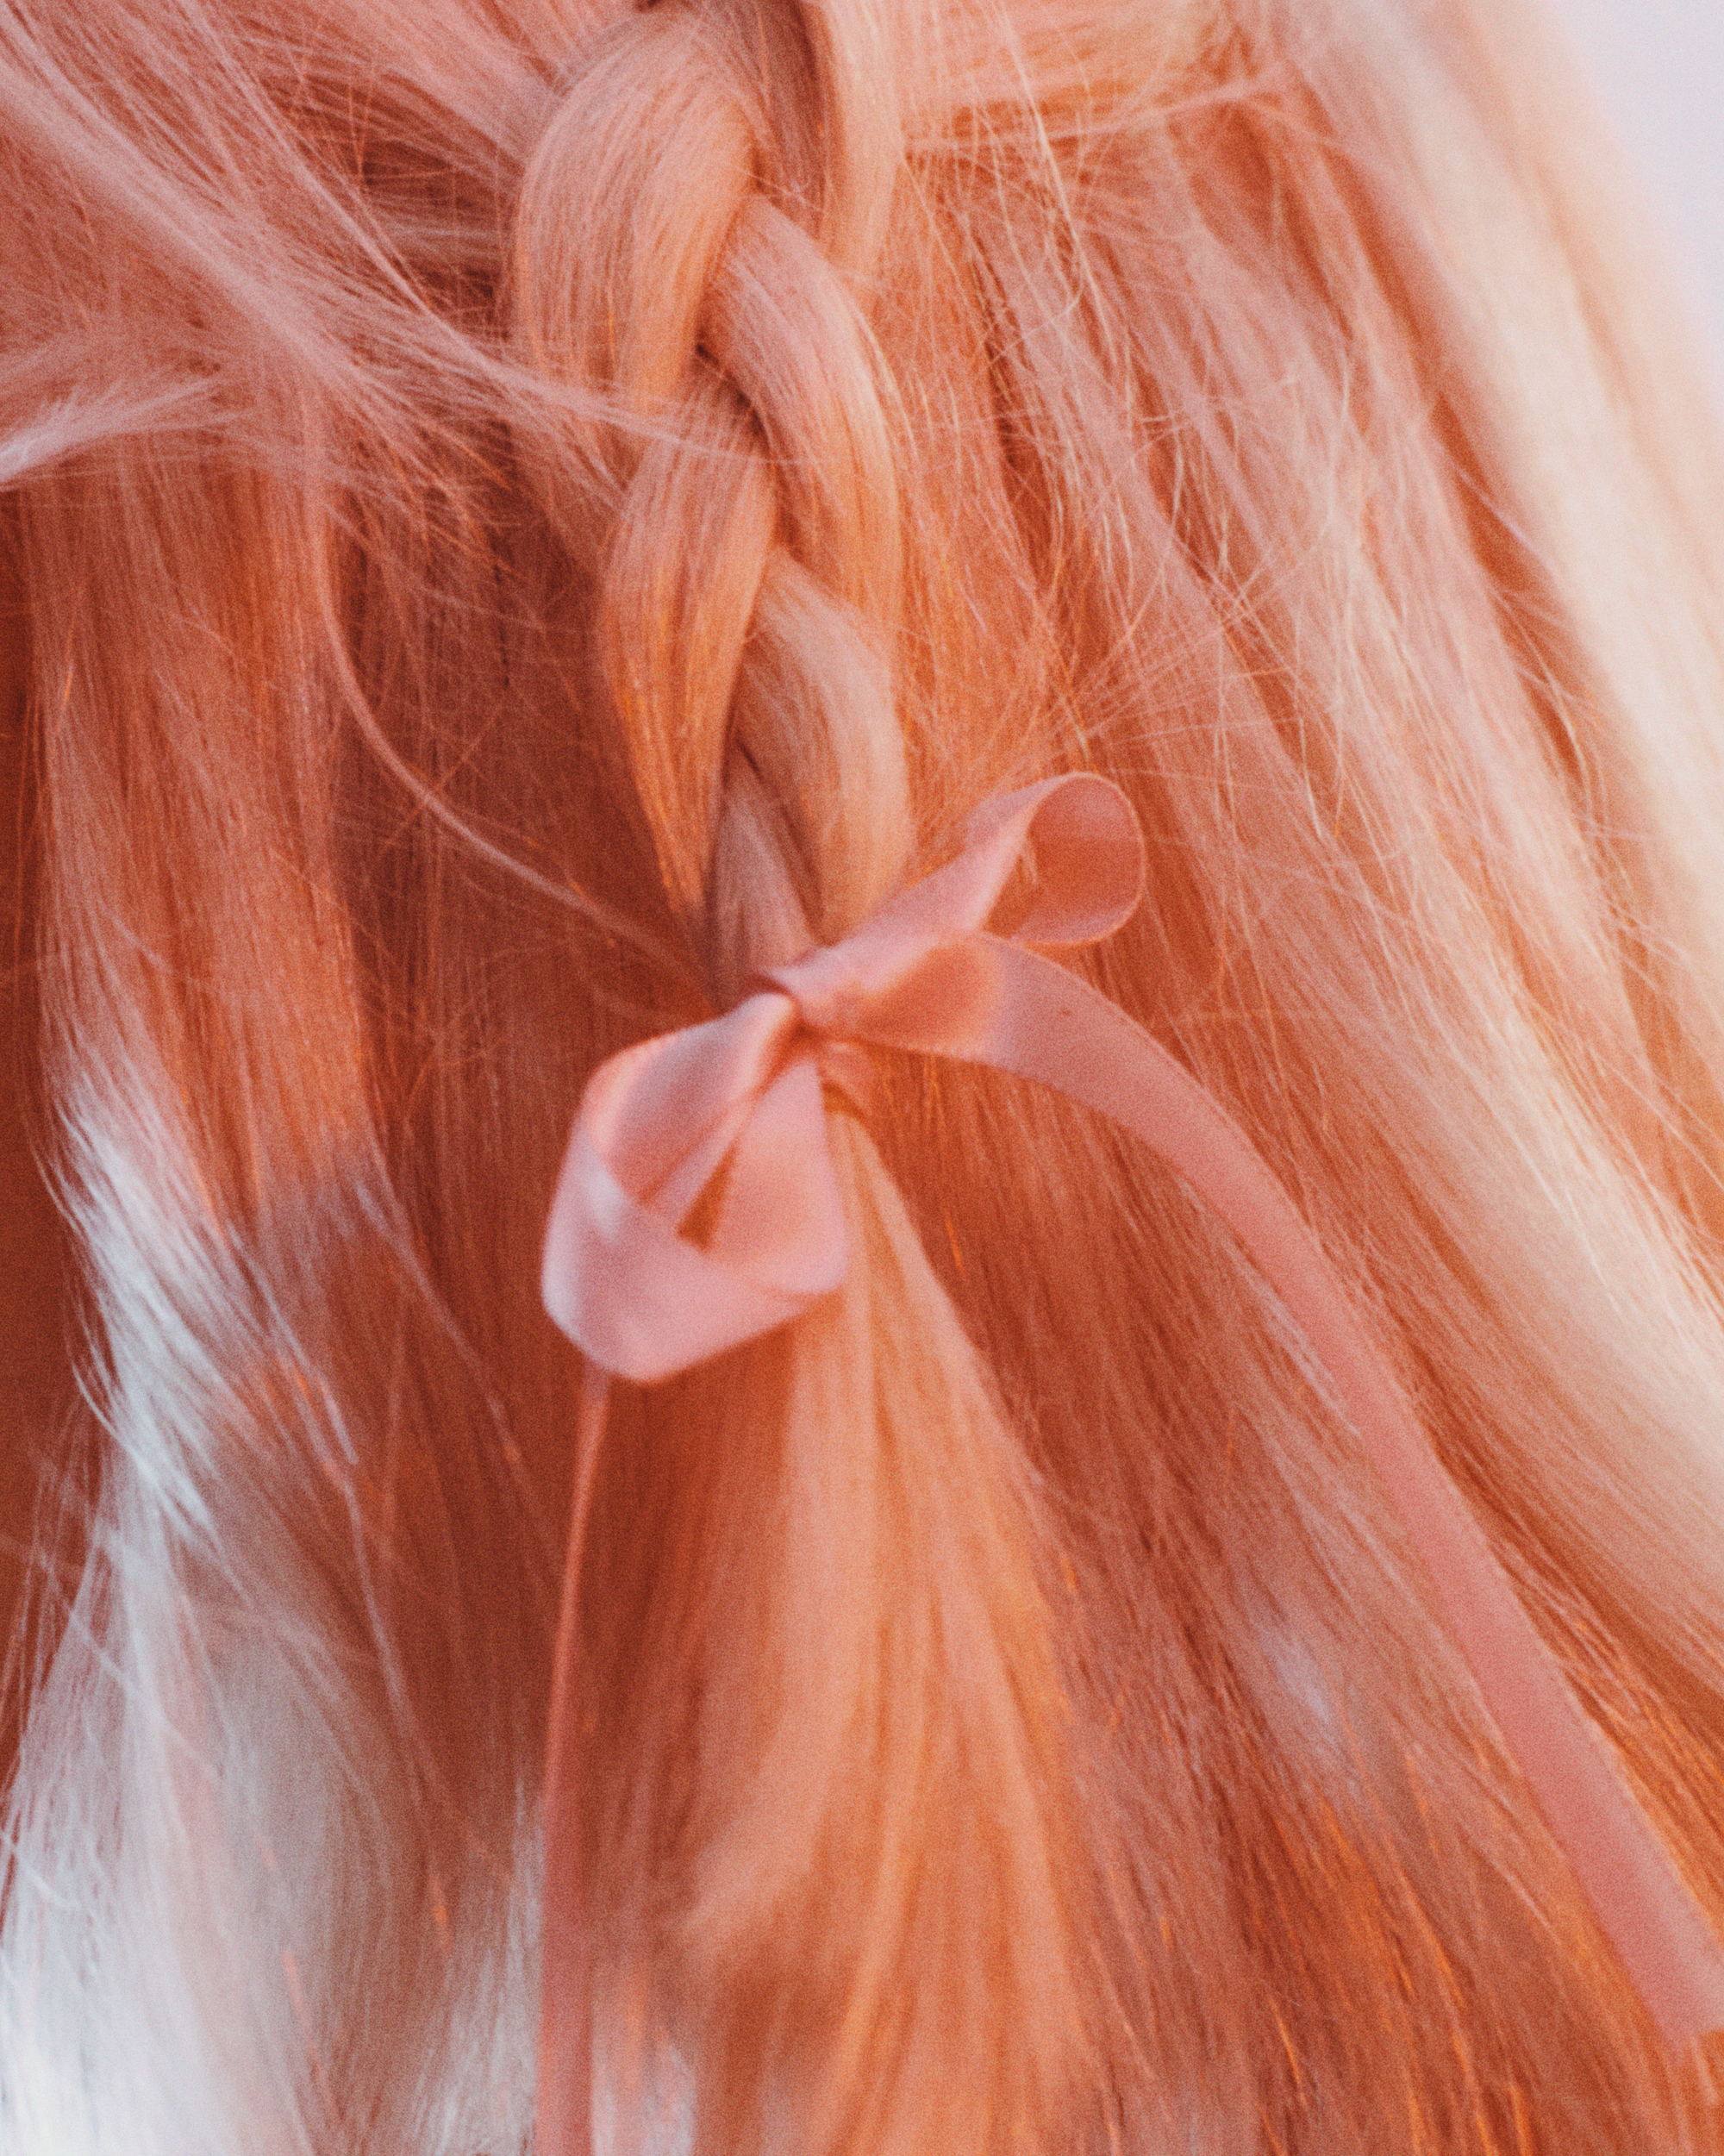 Close up of the bow in Peach PRC's hair photographed by James Tolich for i-D magazine